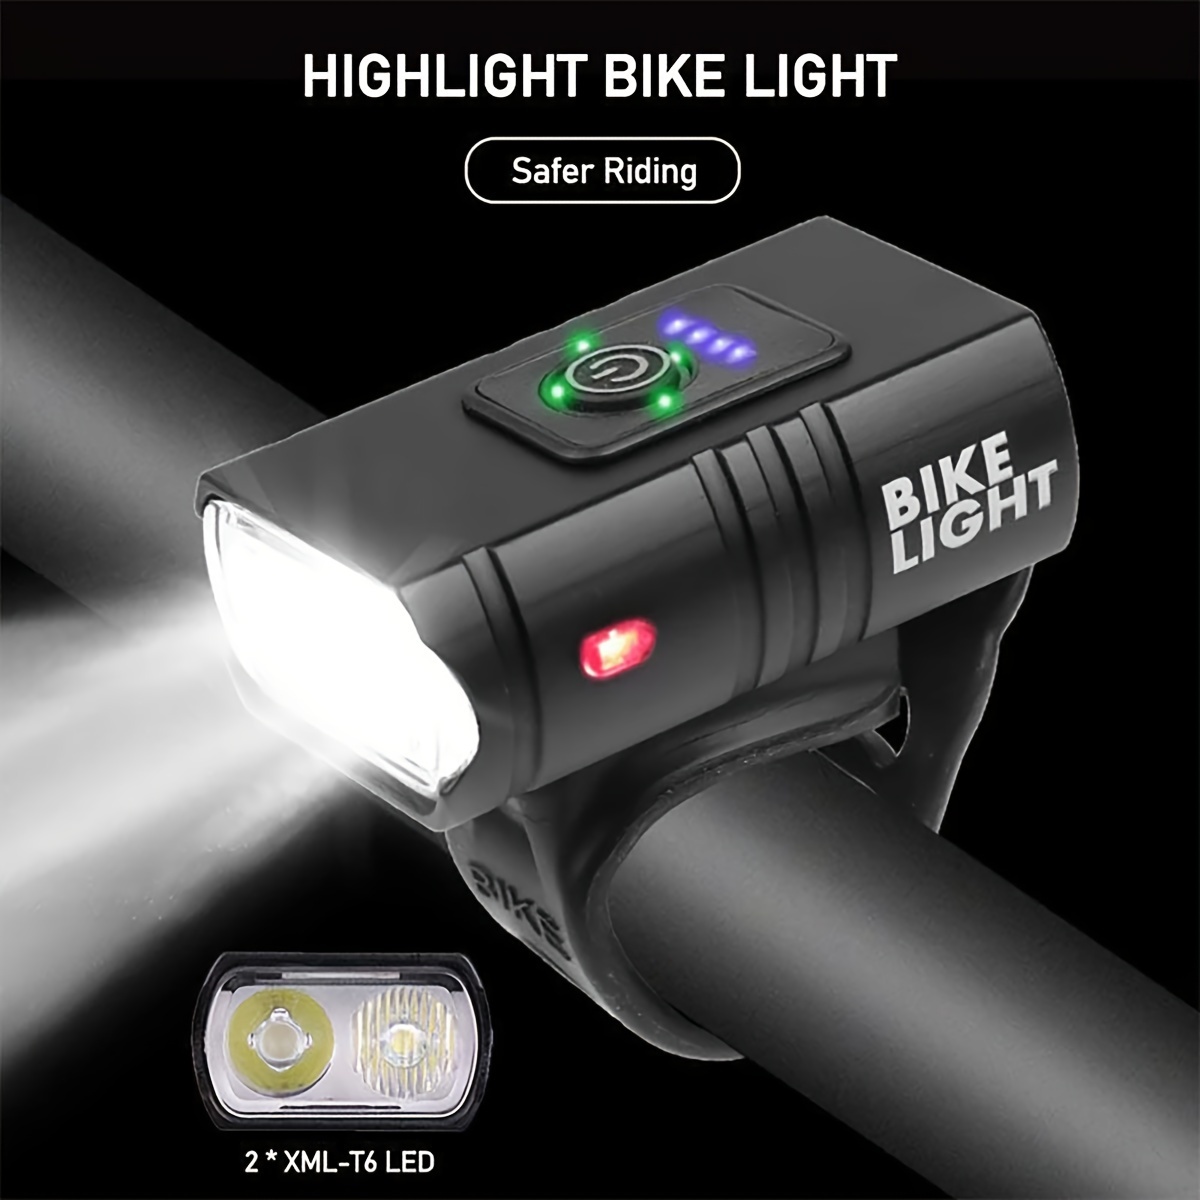 

1pc Usb Rechargeable Led Bike Light With Power Indicator, High-intensity Bicycle Headlight, Compact & Fast Charging Cycling Light